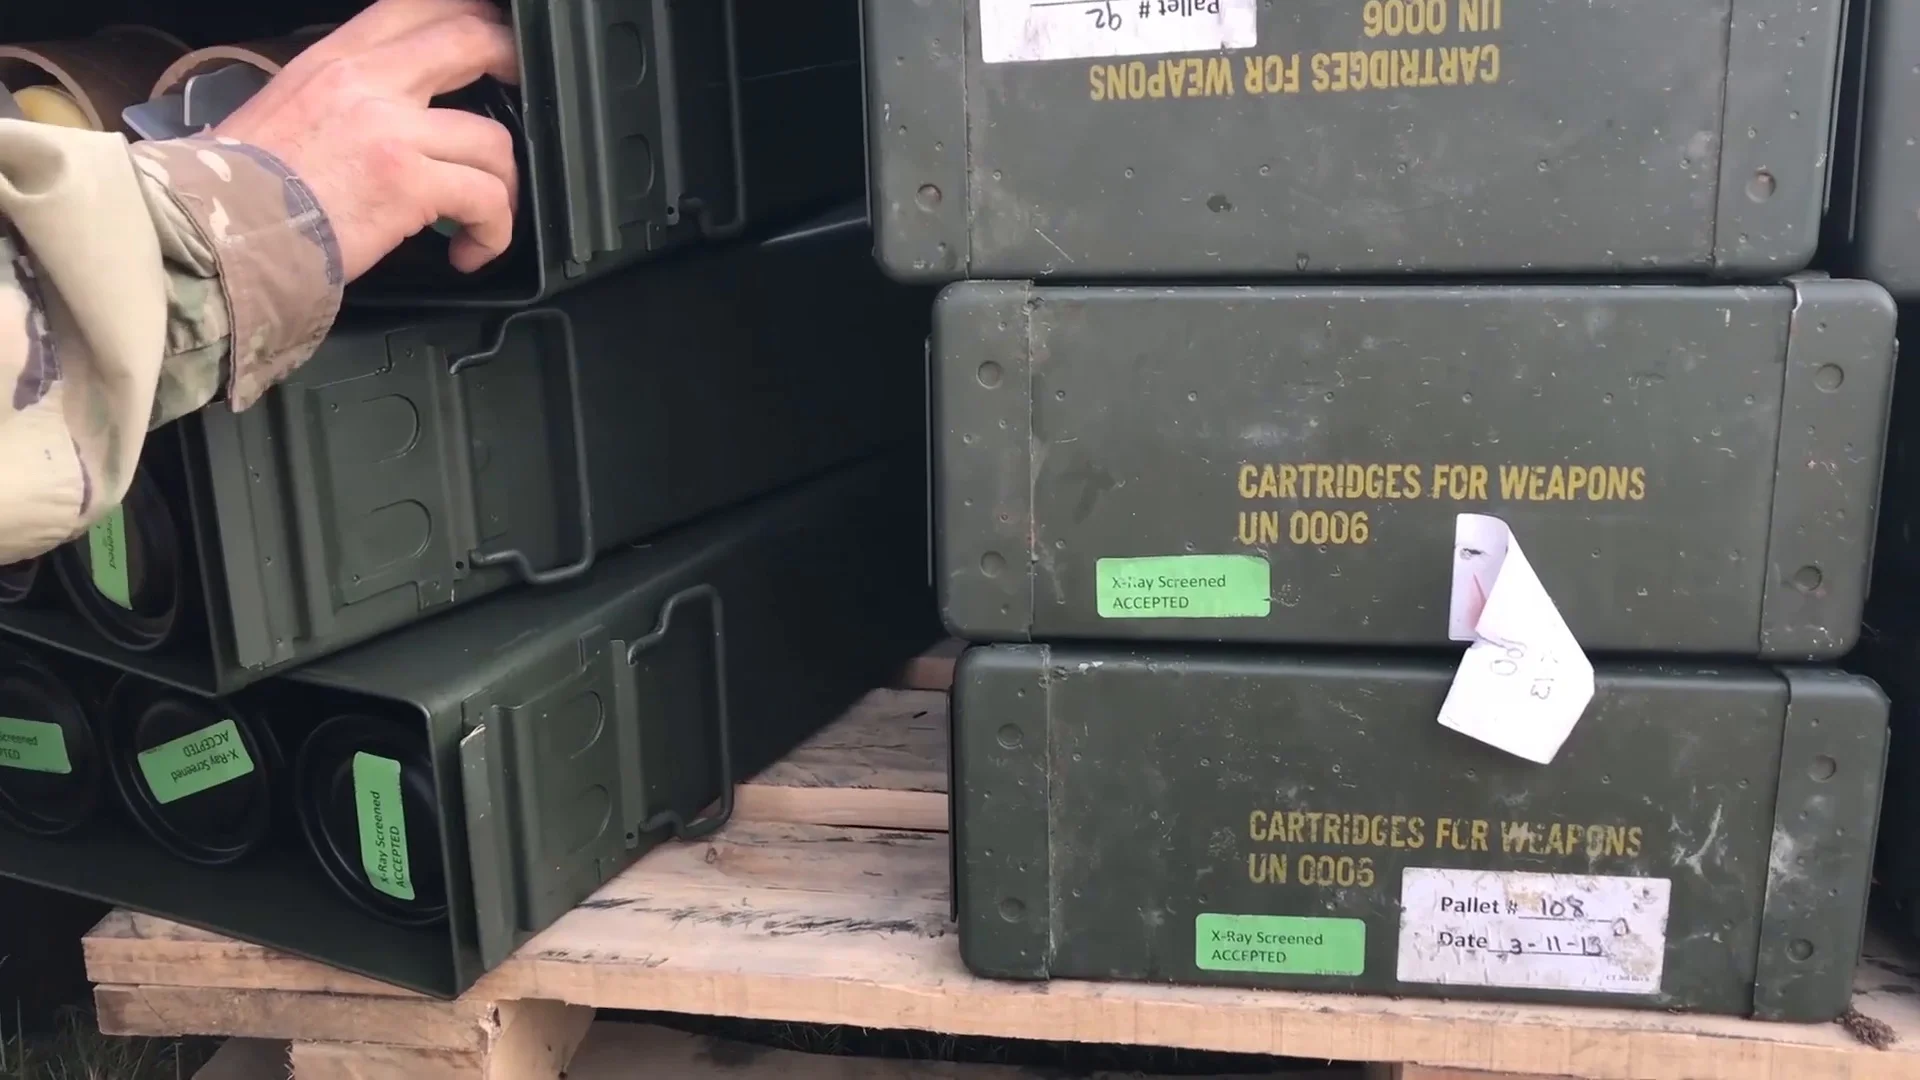 AMMO BOX - 81MM CAN